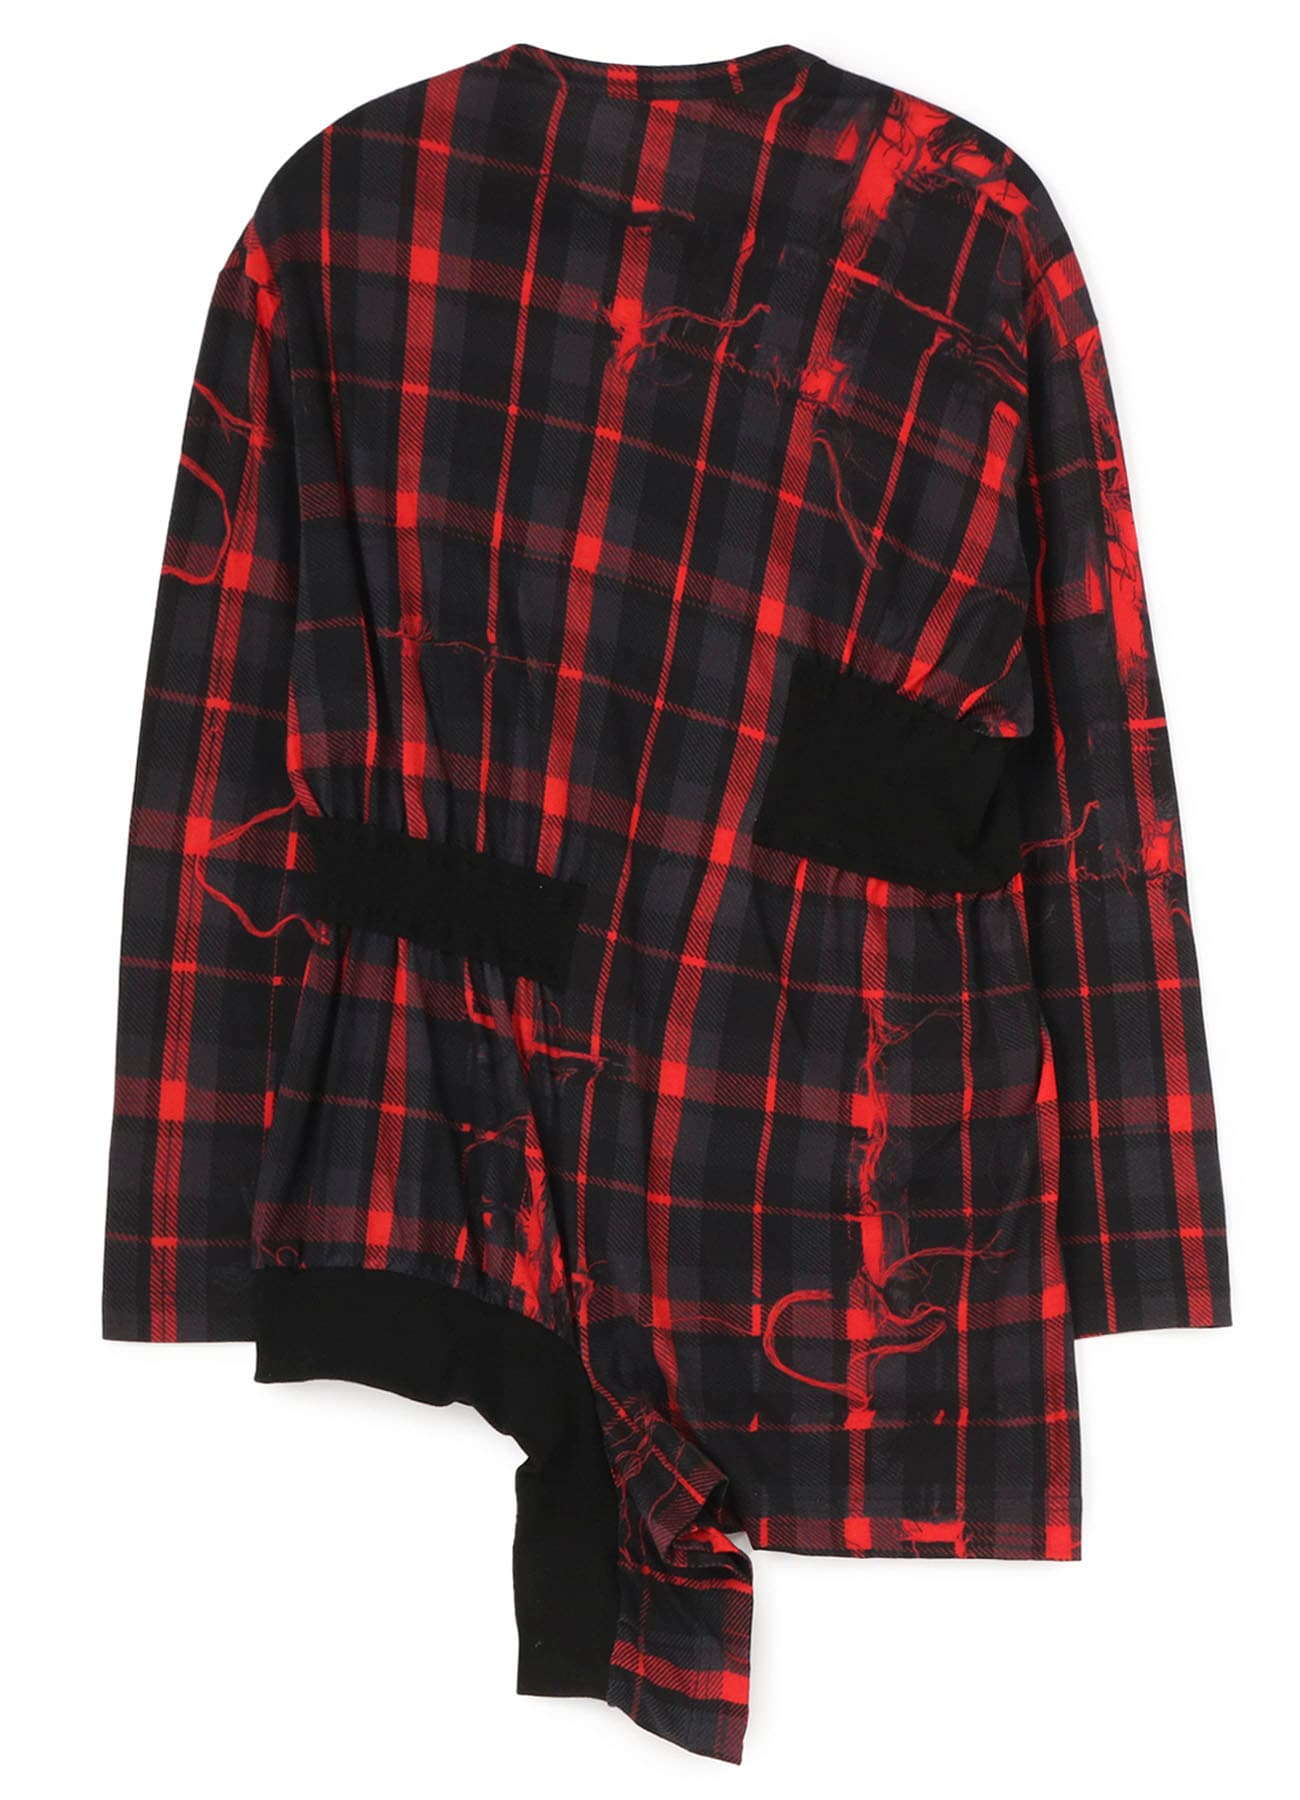 TWISTED CHECK DESIGN GATHER BLOUSE(S Red): Vintage 1.1｜THE SHOP 